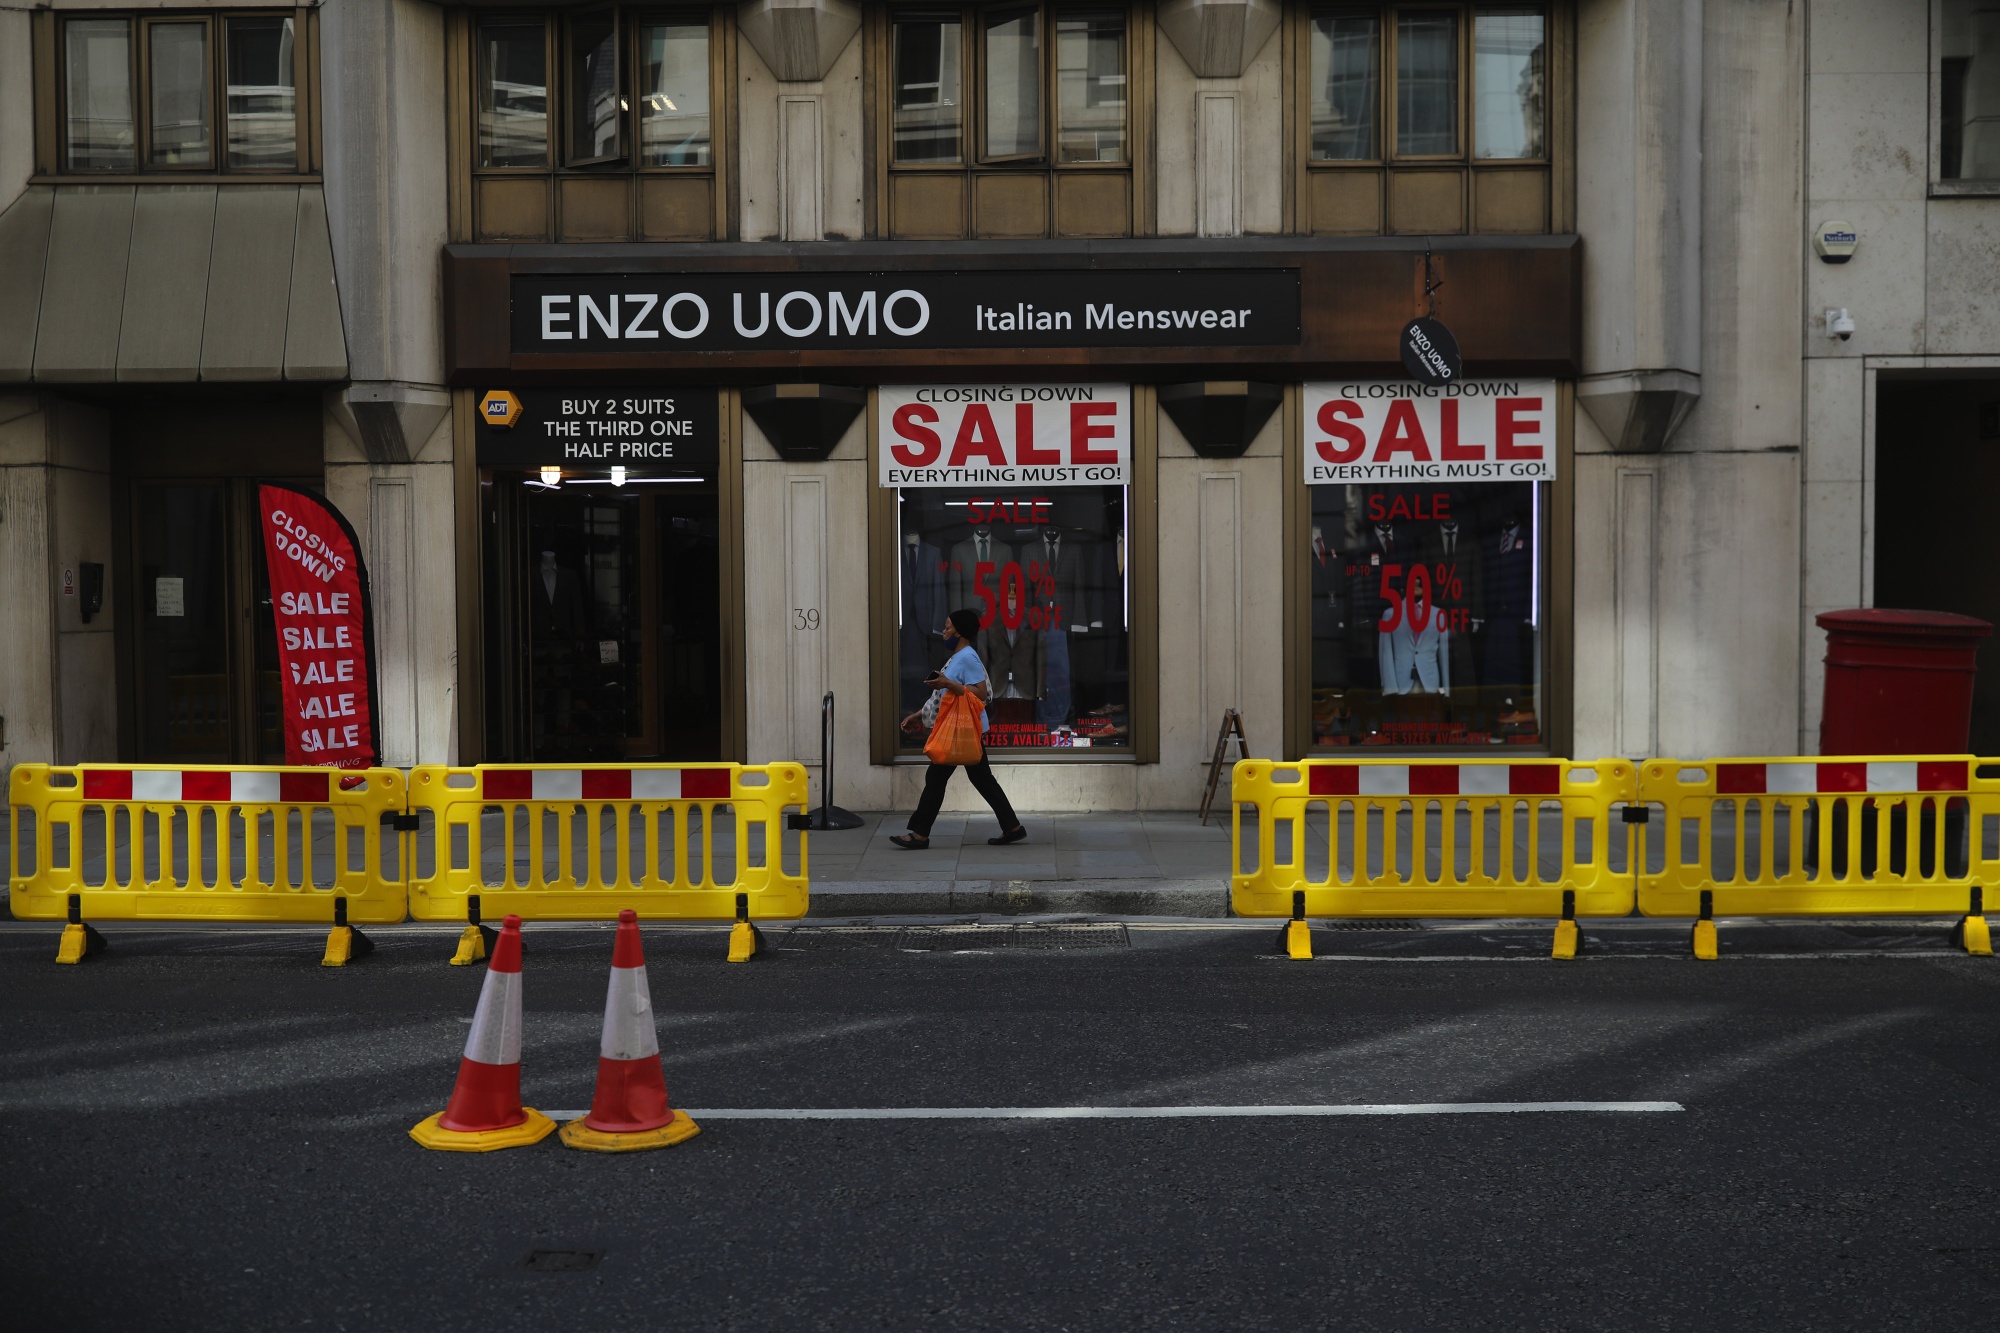 A pedestrian passes a suit store offering closing down sale prices in London on Aug. 12.